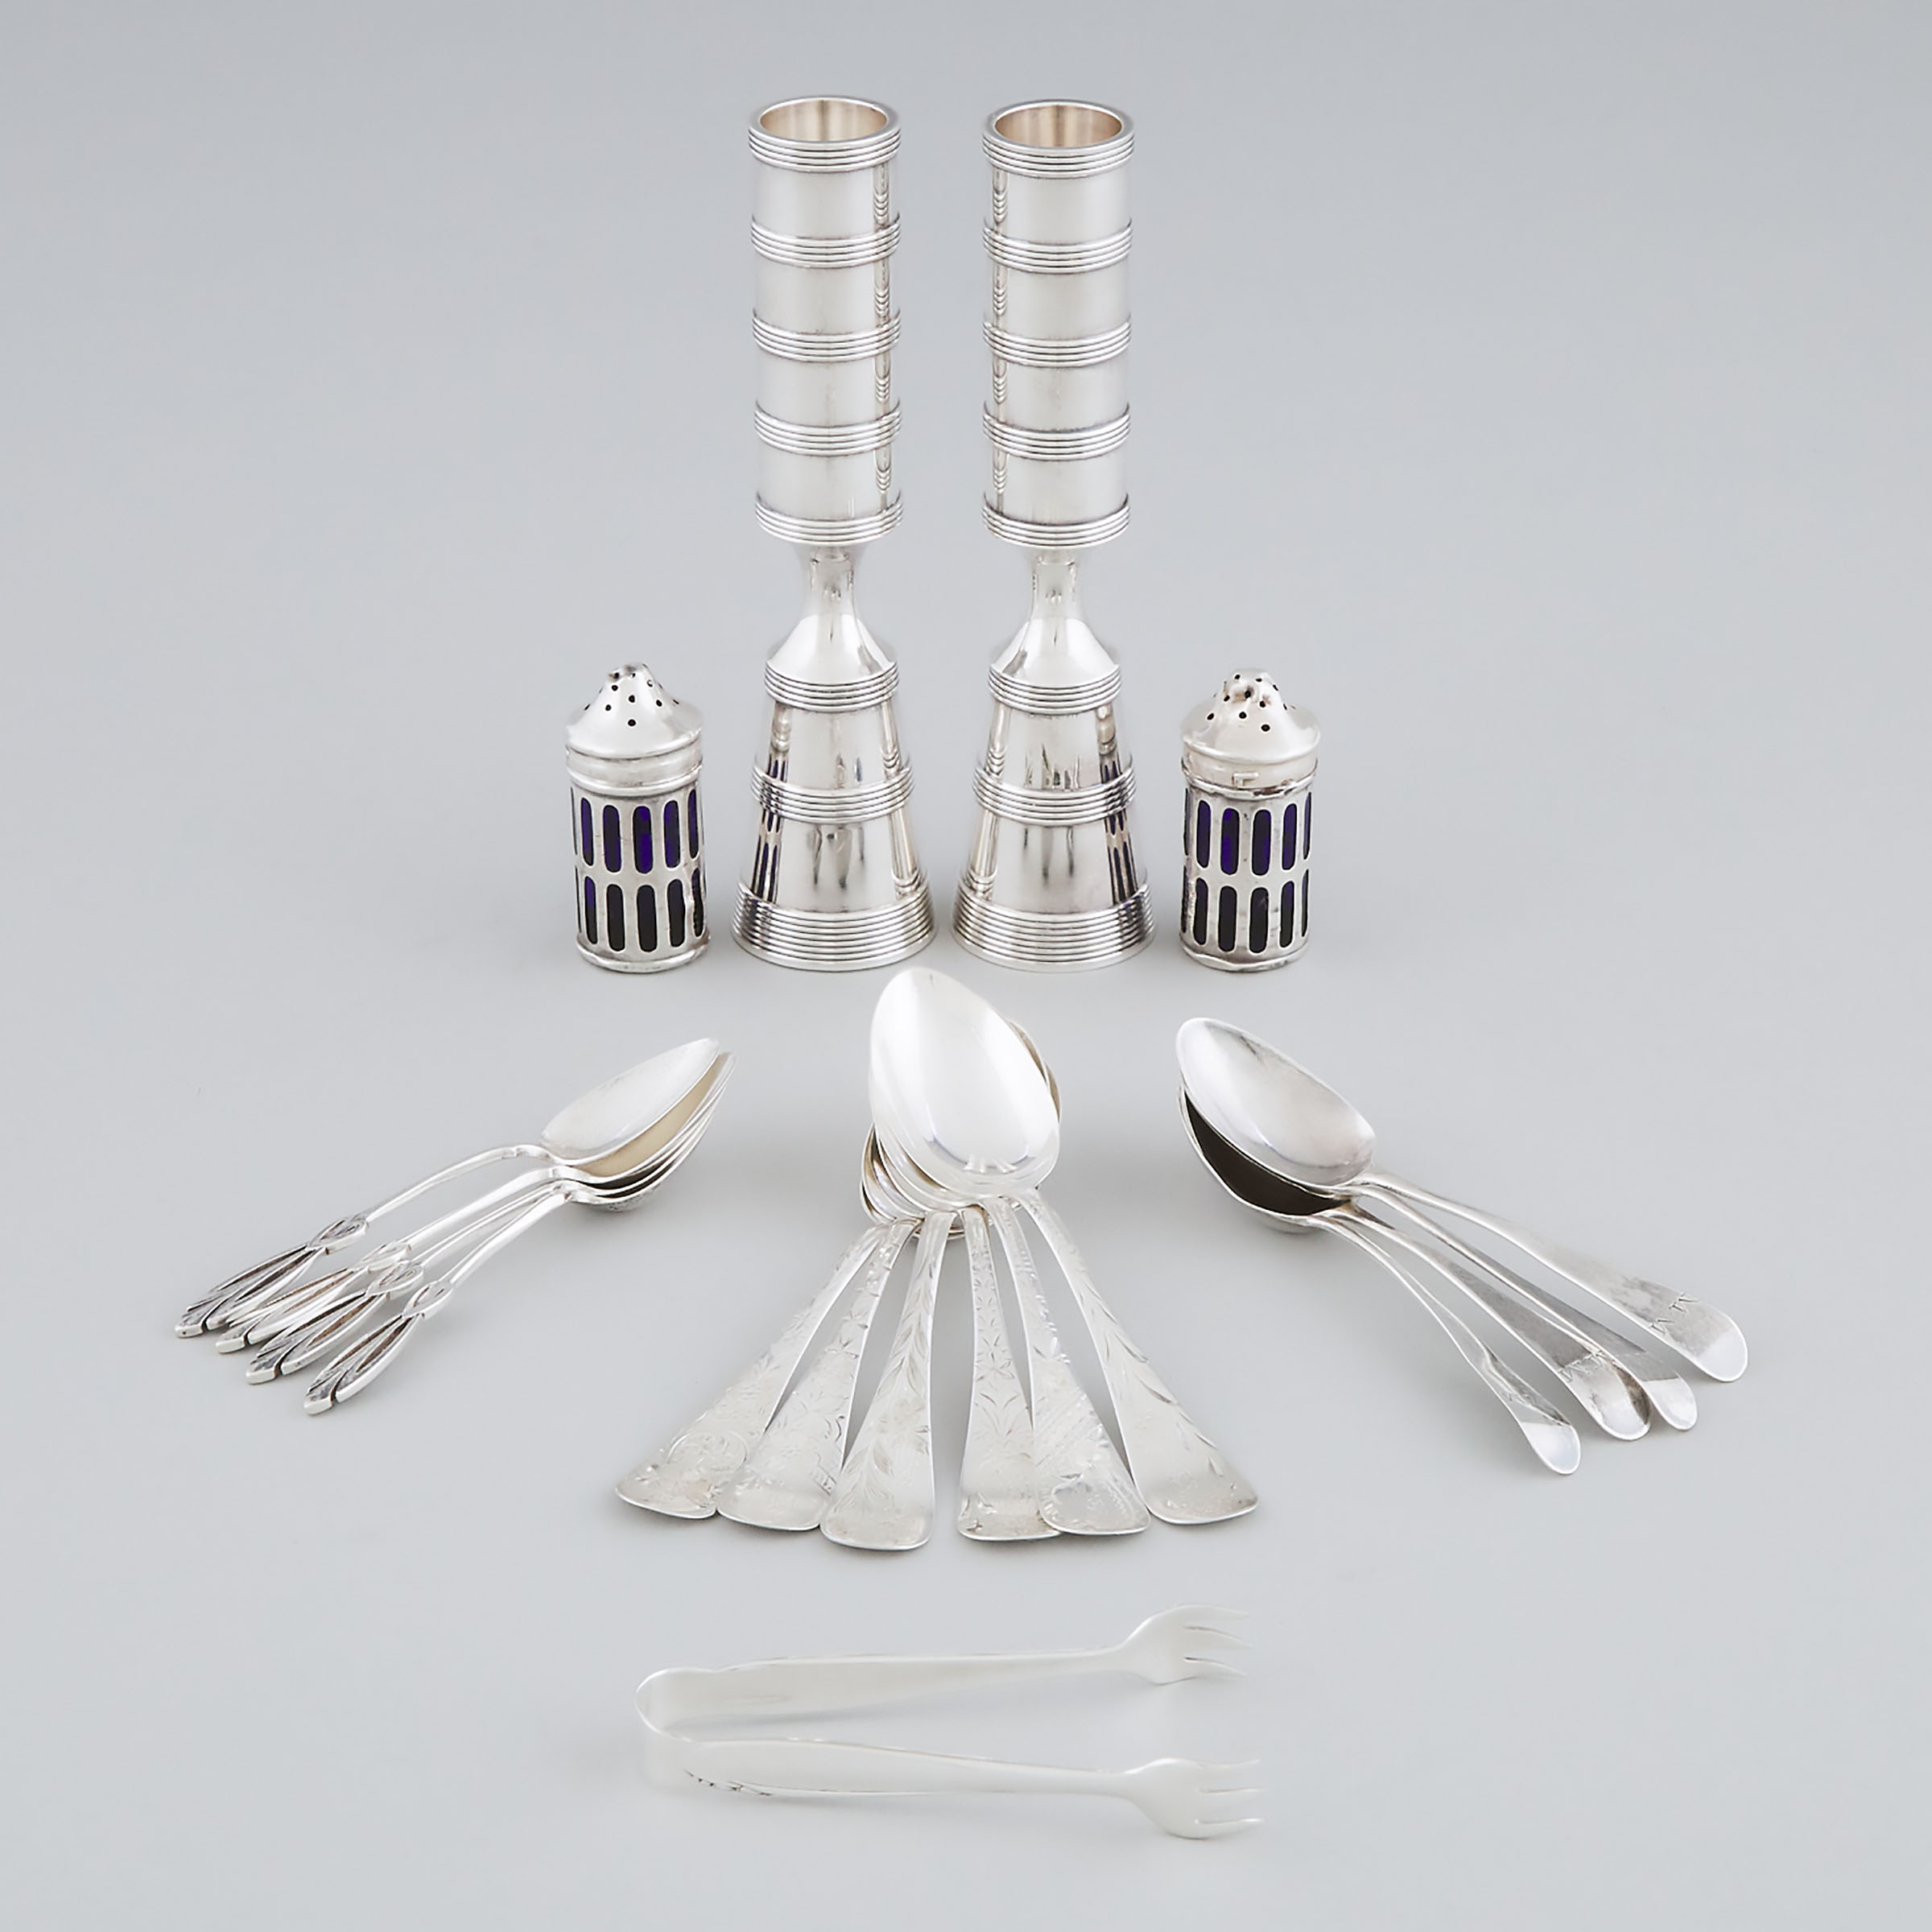 Pair of Danish Silver Plated Candlesticks, Jens Quistgaard for Dansk, mid-20th century